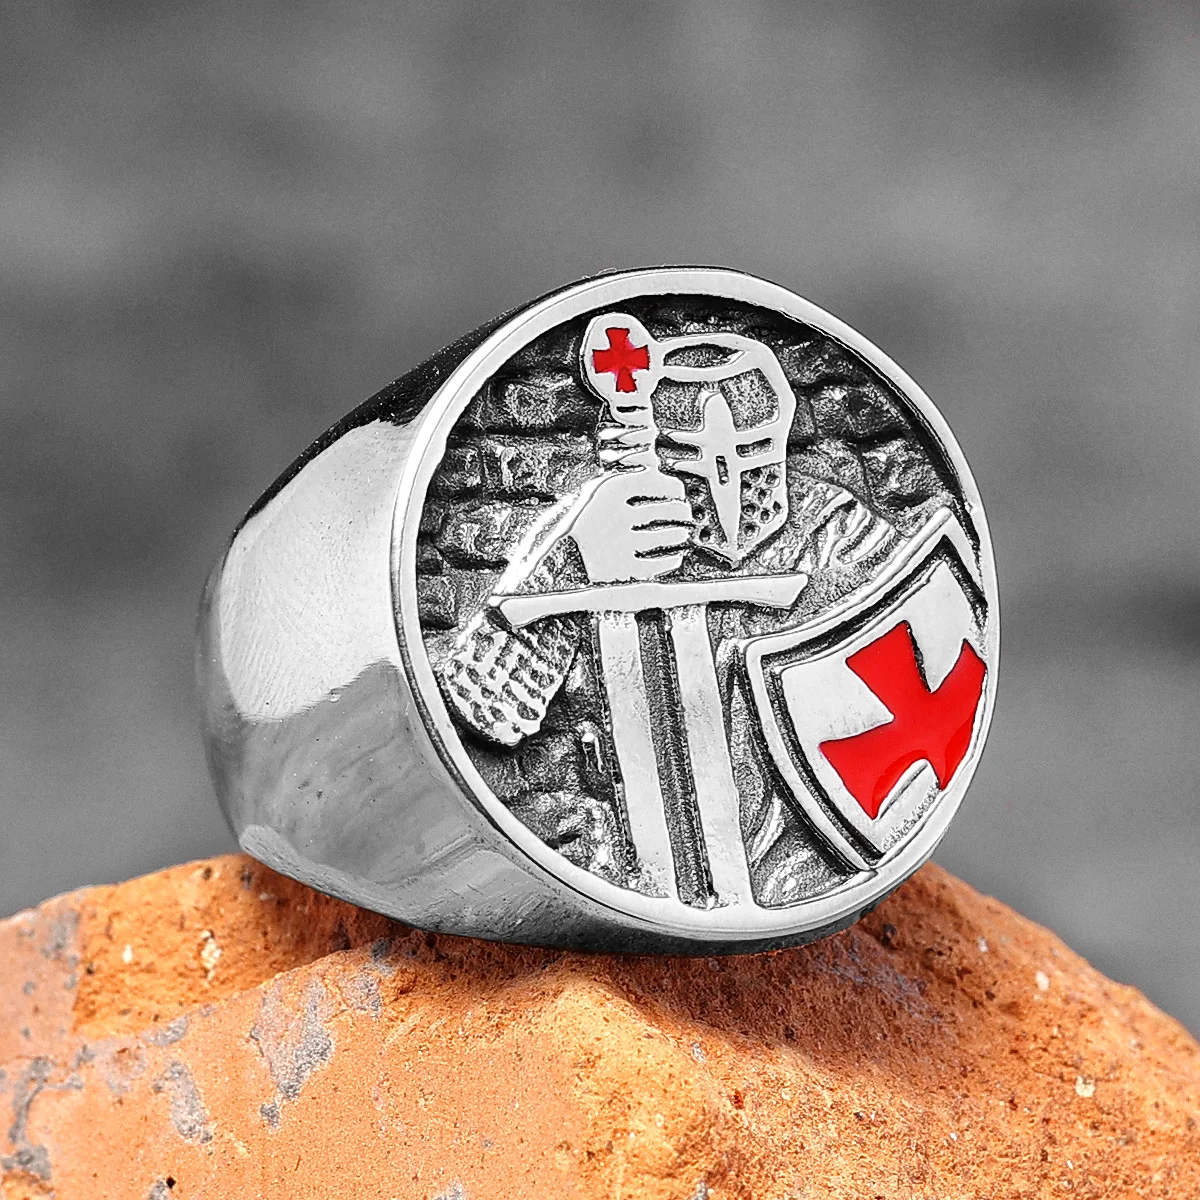 Paladin Crusader Stainless Steel Mens Rings Punk Religious Cross Amulet for Male Boyfriend Jewelry Creativity Gift Wholesale